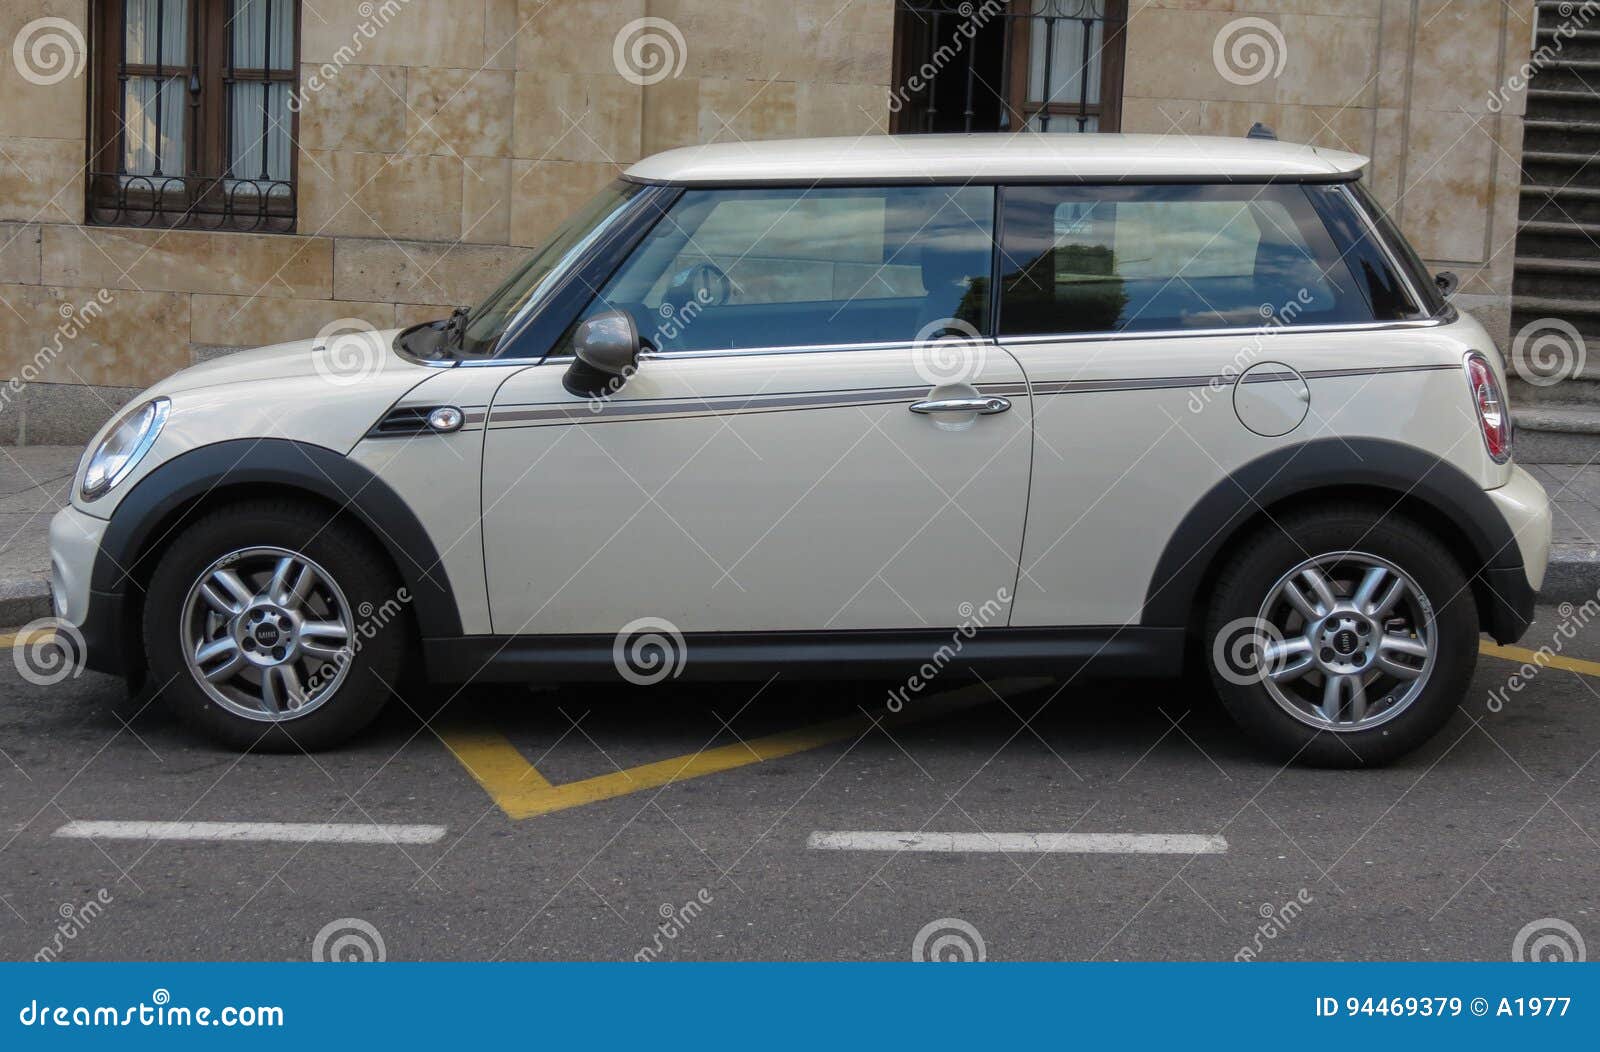 Off White Mini Cooper Car Parked in Salamanca Editorial Image - of travelling, parked: 94469379